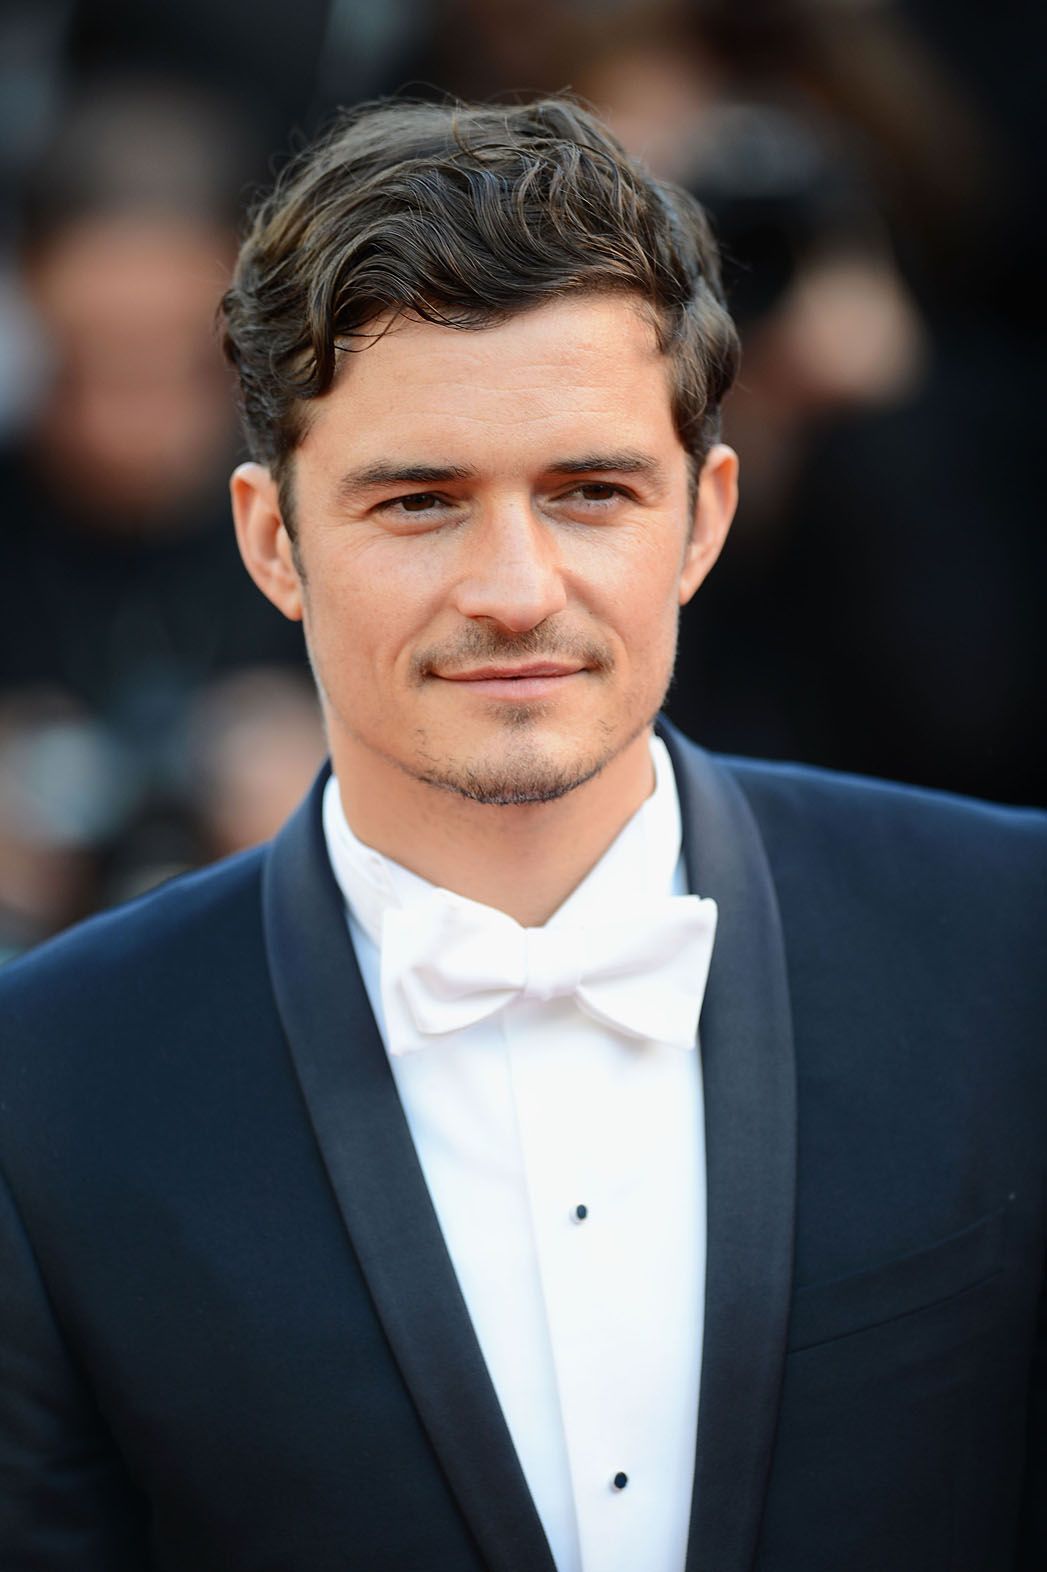 Orlando Bloom Believes Himself to Be A ‘Very English’ James Bond